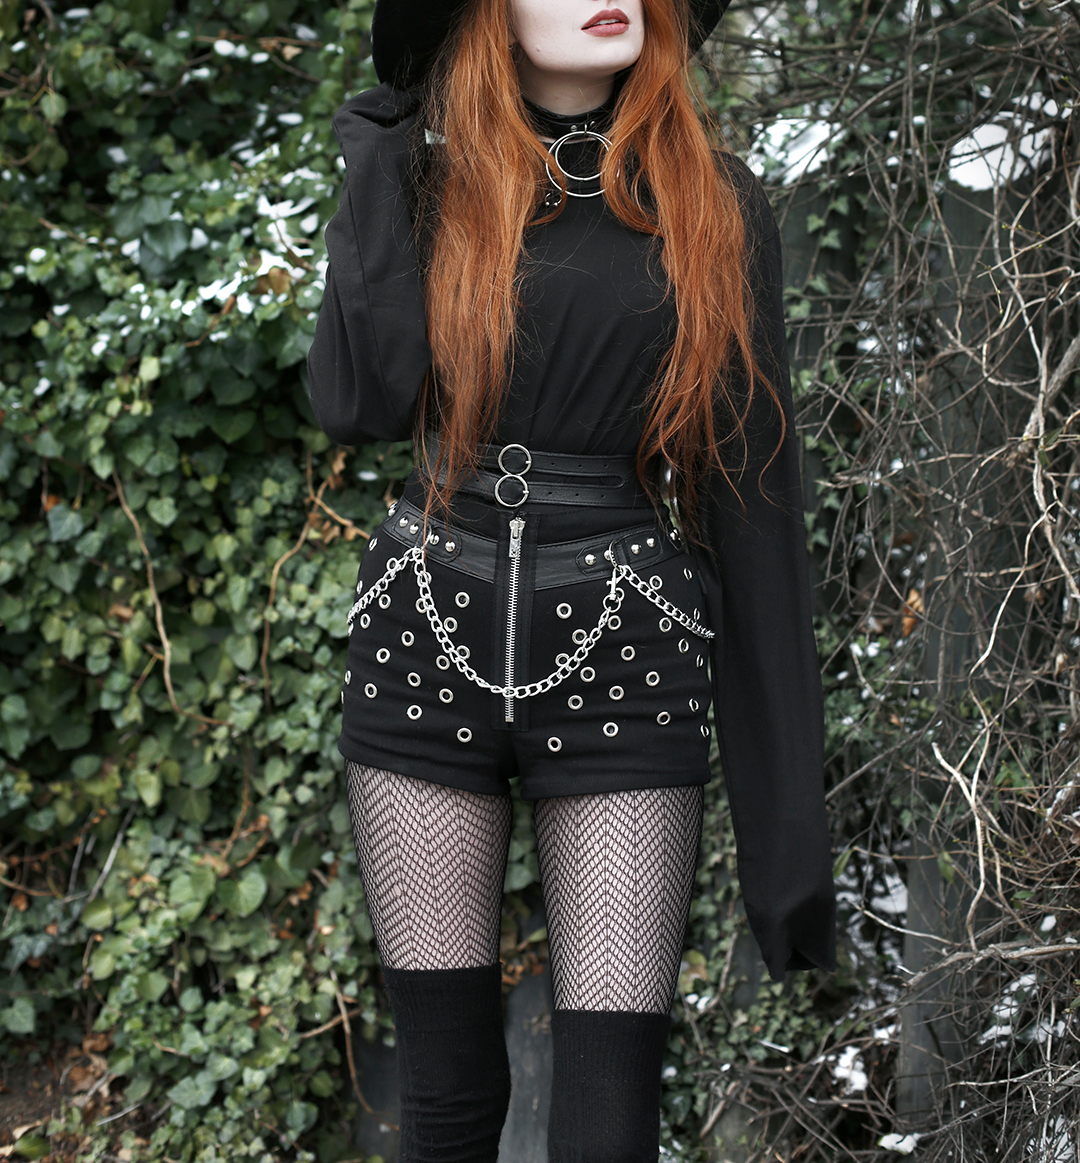 Olivia Emily styles up statement studded shorts for colder temperatures with cosy overknee socks and an oversized top